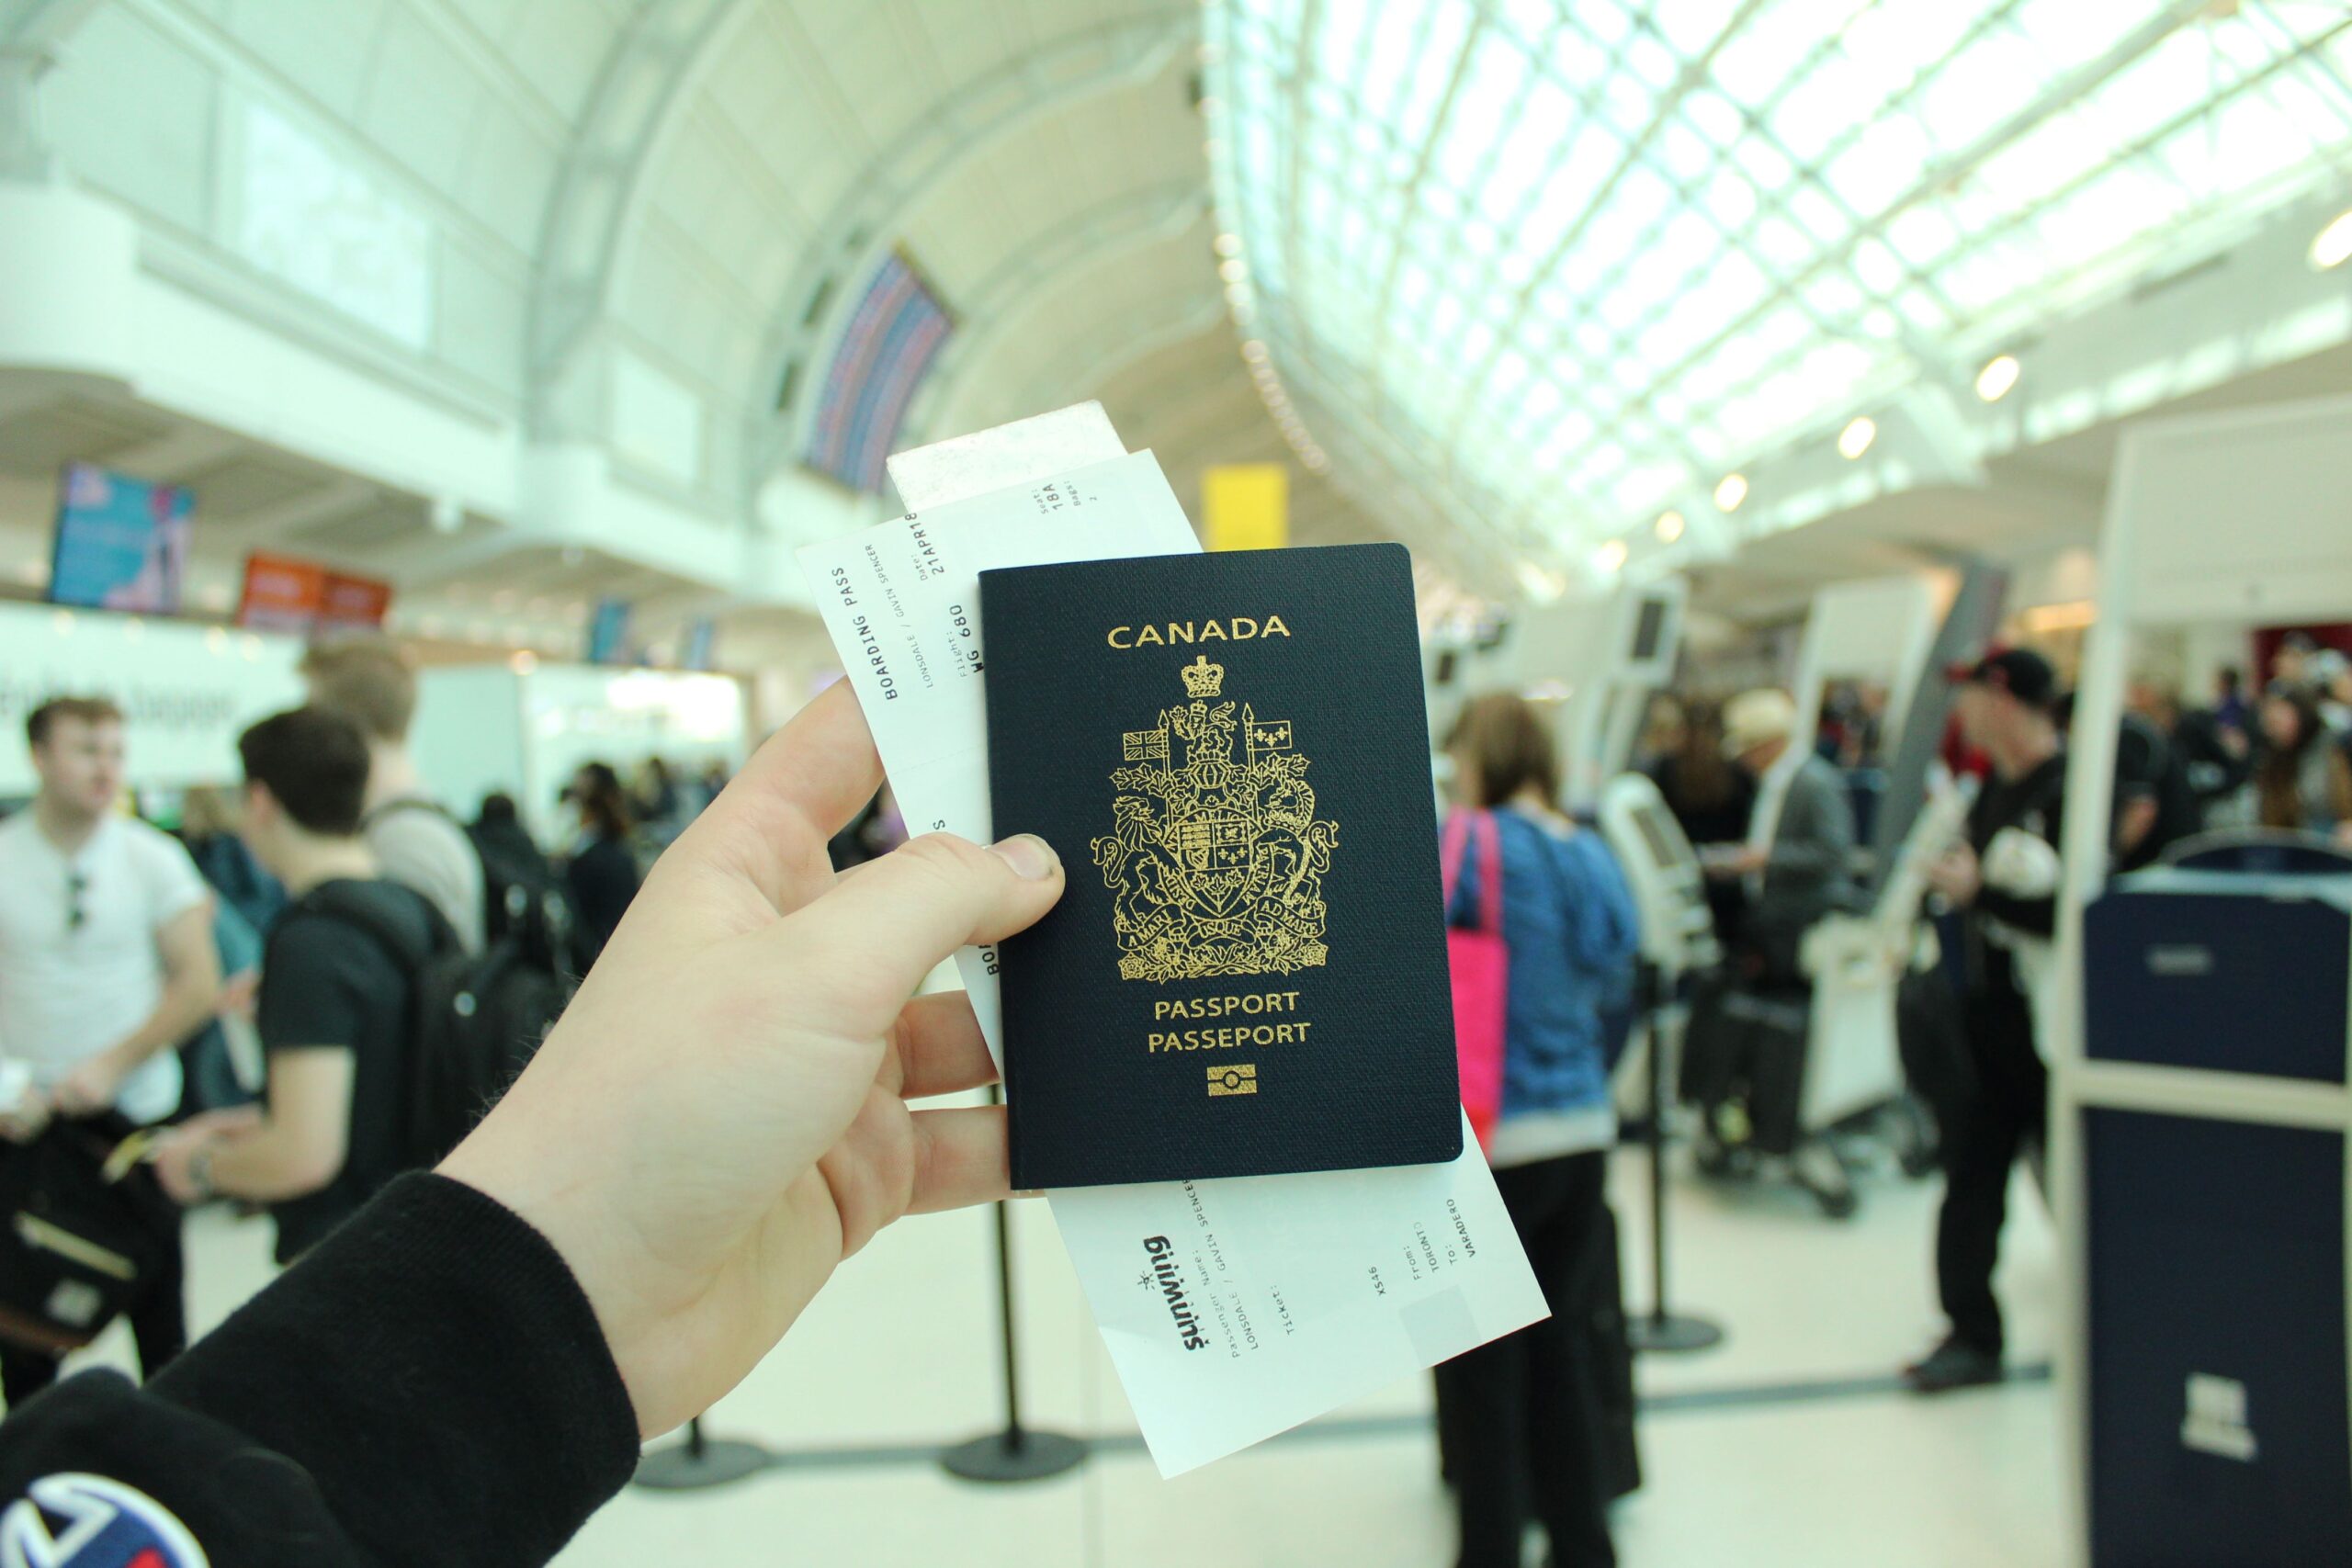 Photo of someone holding up a passport with airplane tickets behind it at an airport.